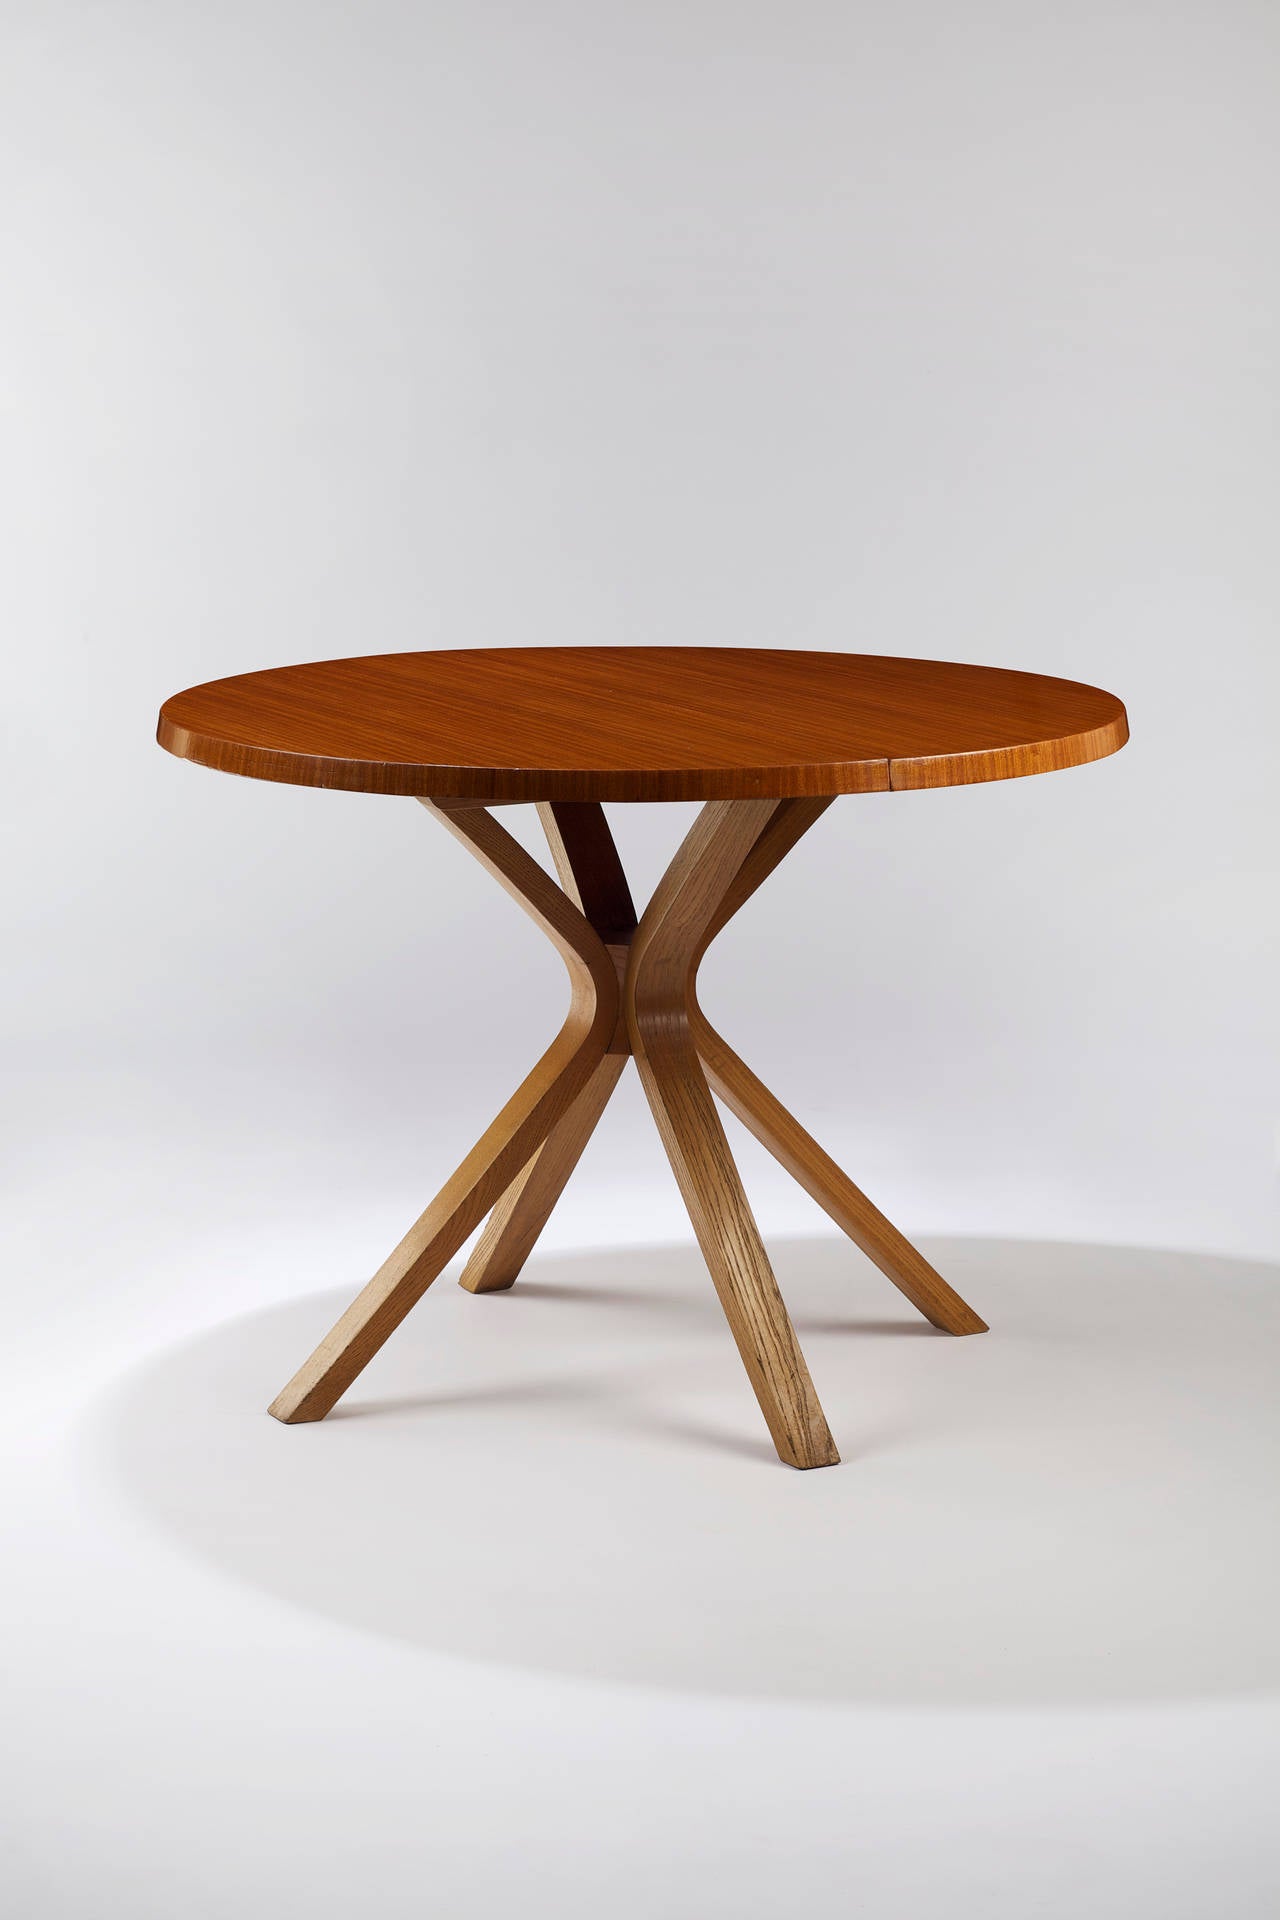 Ash and mahogany. 
Comes with one table extension when used the table increases to oval: 50.39